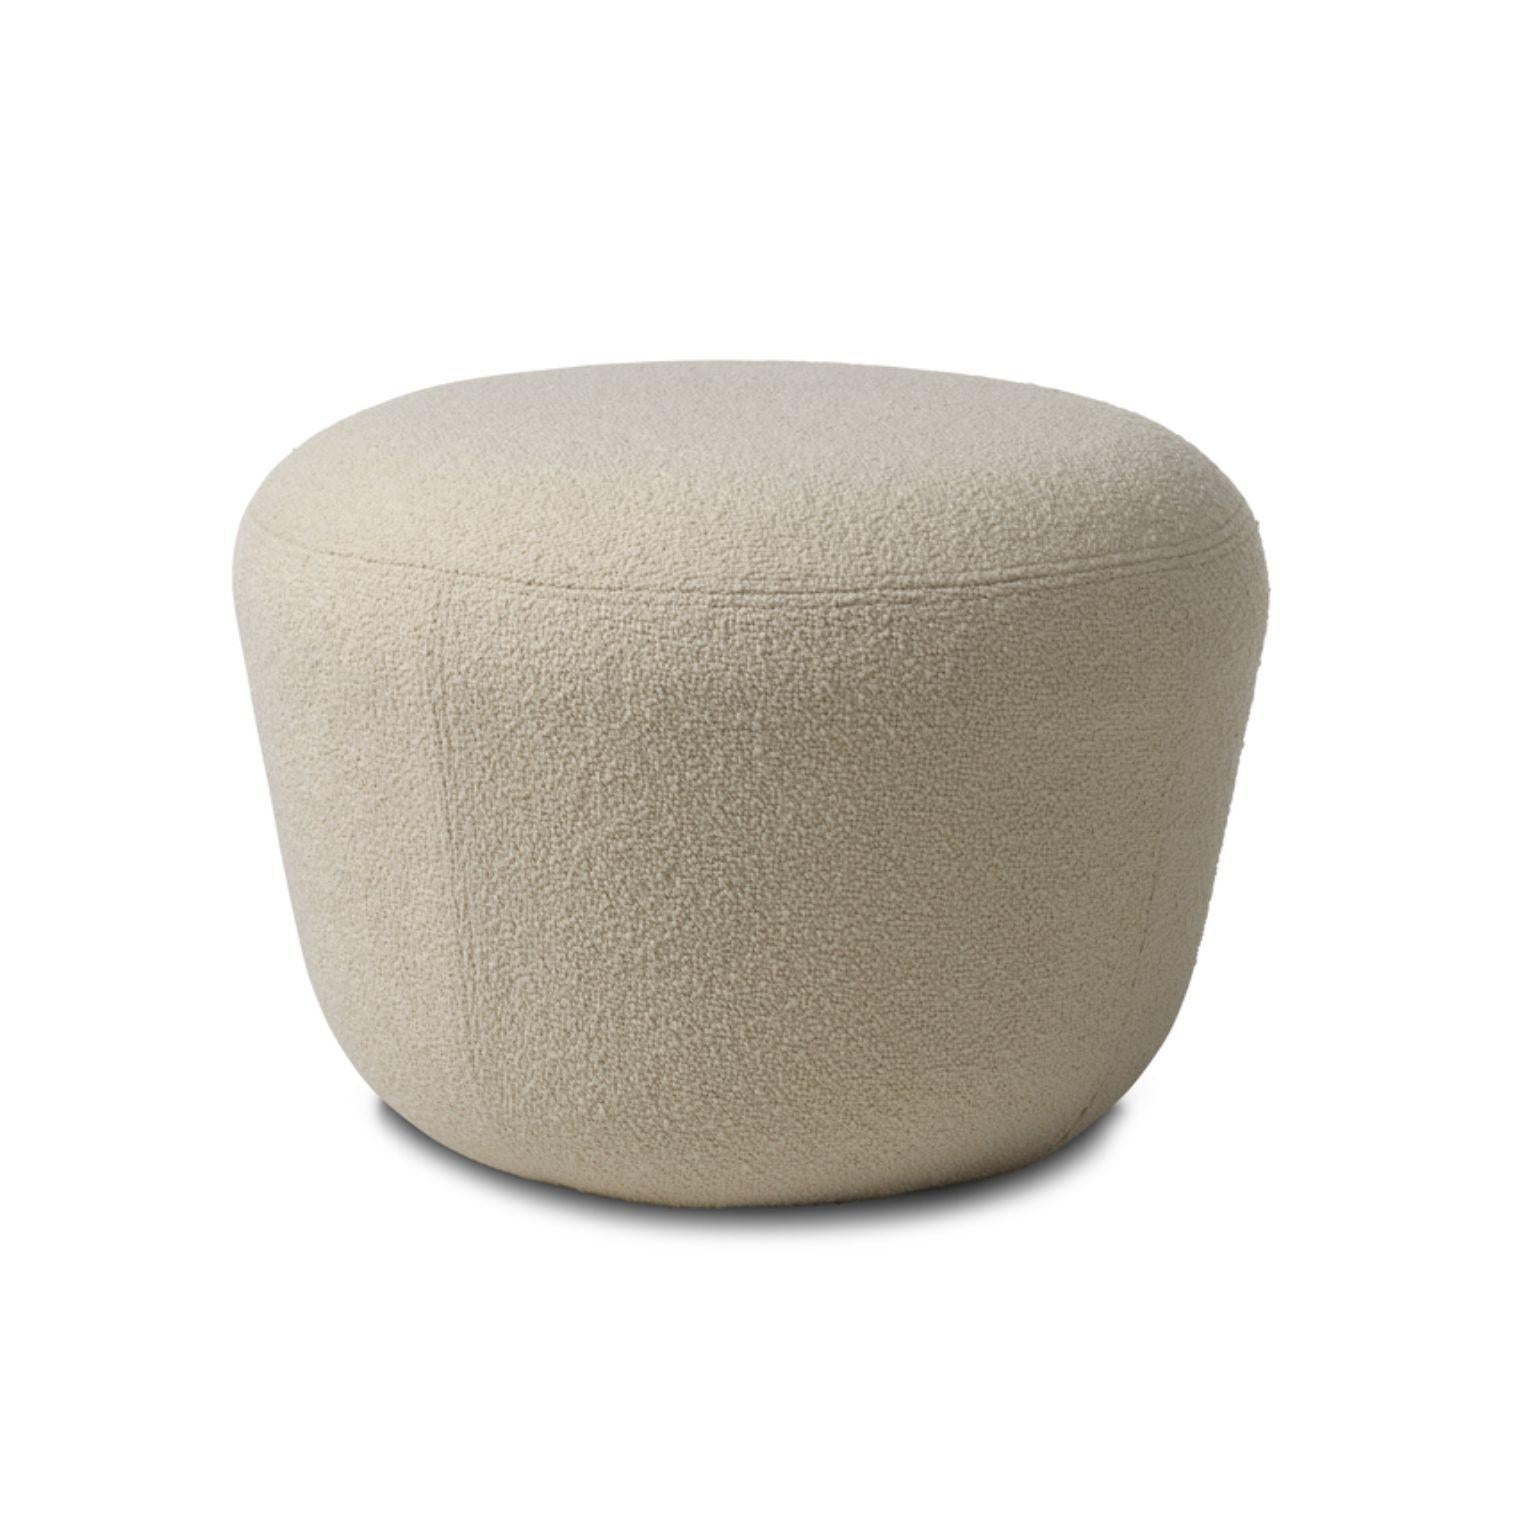 Danish Haven Sprinkles Cappuccino Brown Pouf by Warm Nordic For Sale